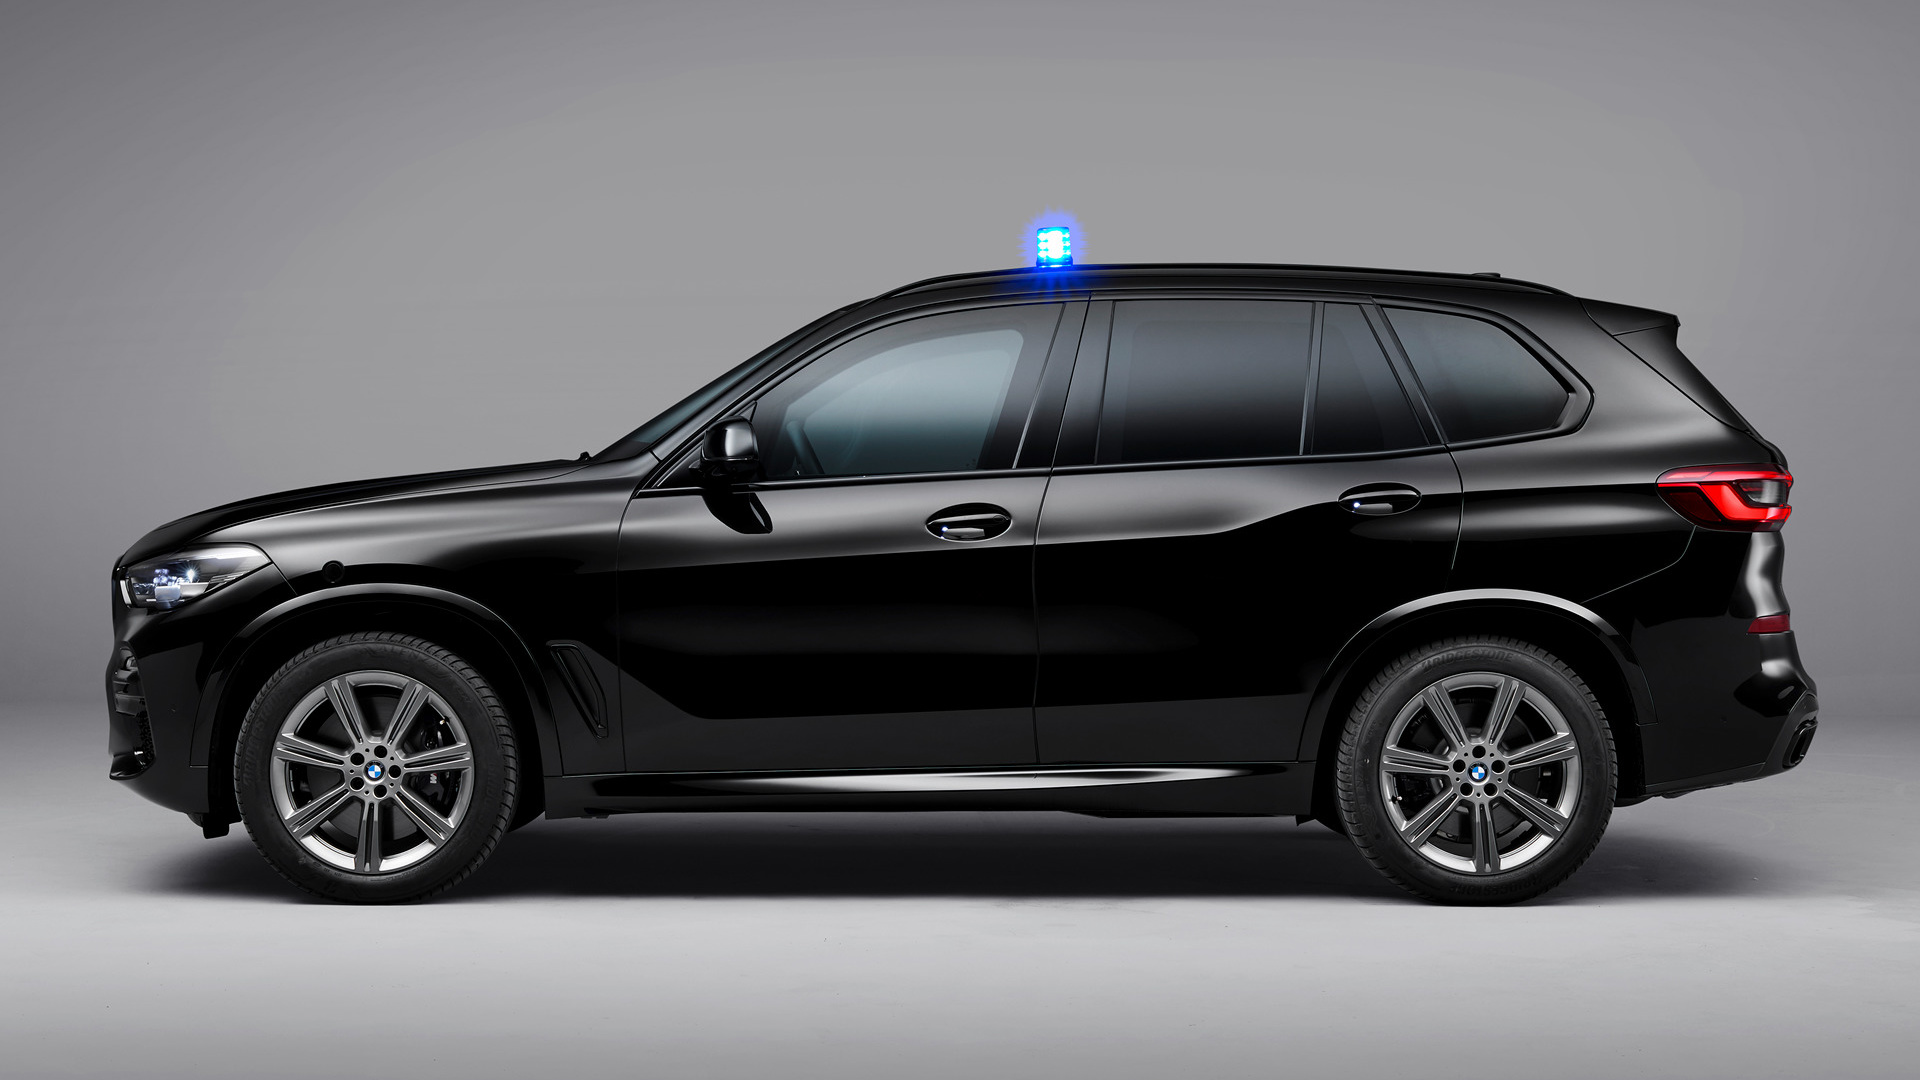 Bmw X5 Protection Vr6 HD Wallpaper Background Image